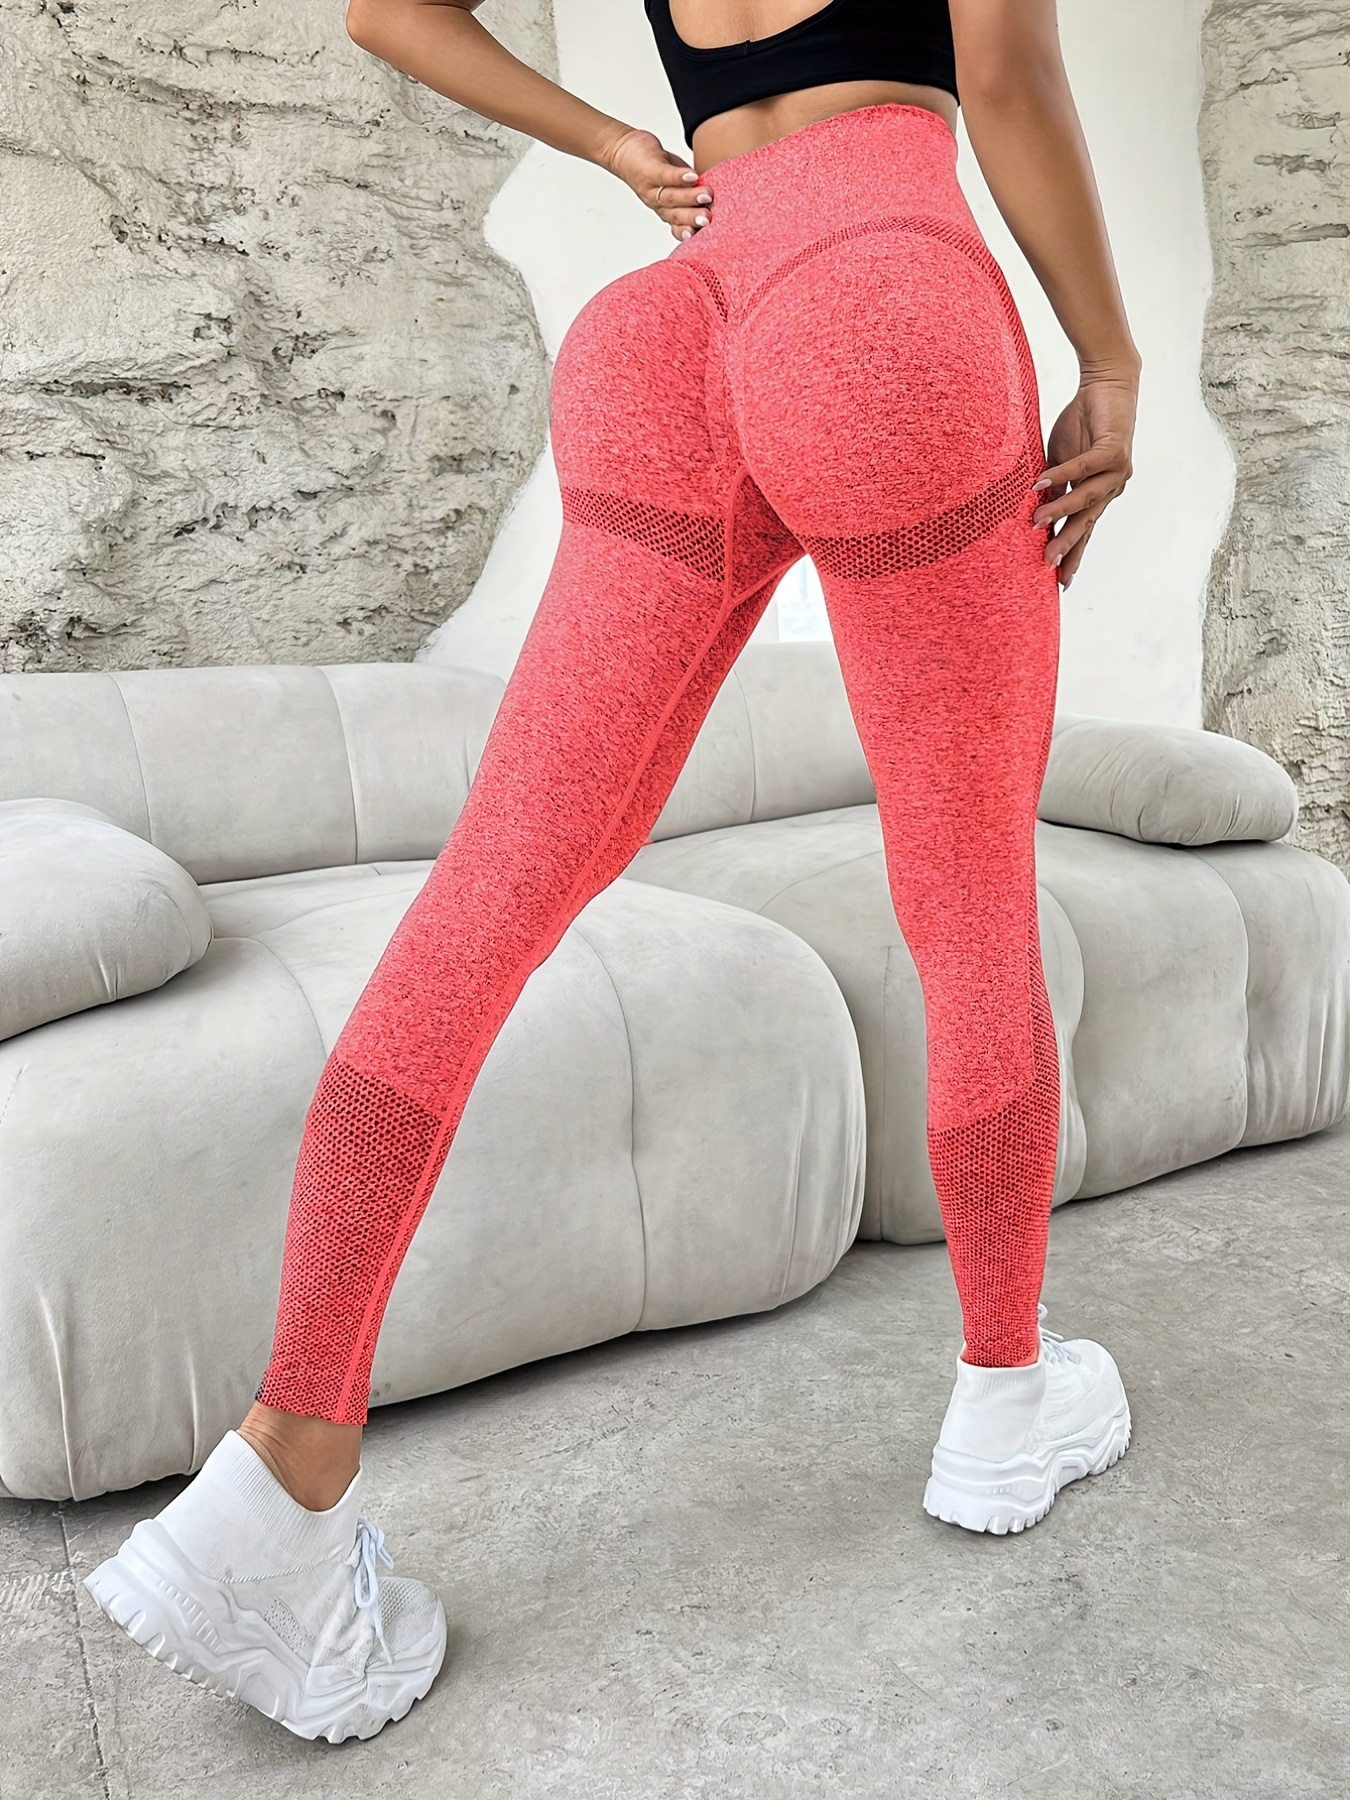 Women Bubble Butt Leggings Seamless Push Up Fitness High Waist Leggings  Women Sport Sexy Workout Legging Colors as pictures Small Red/gre